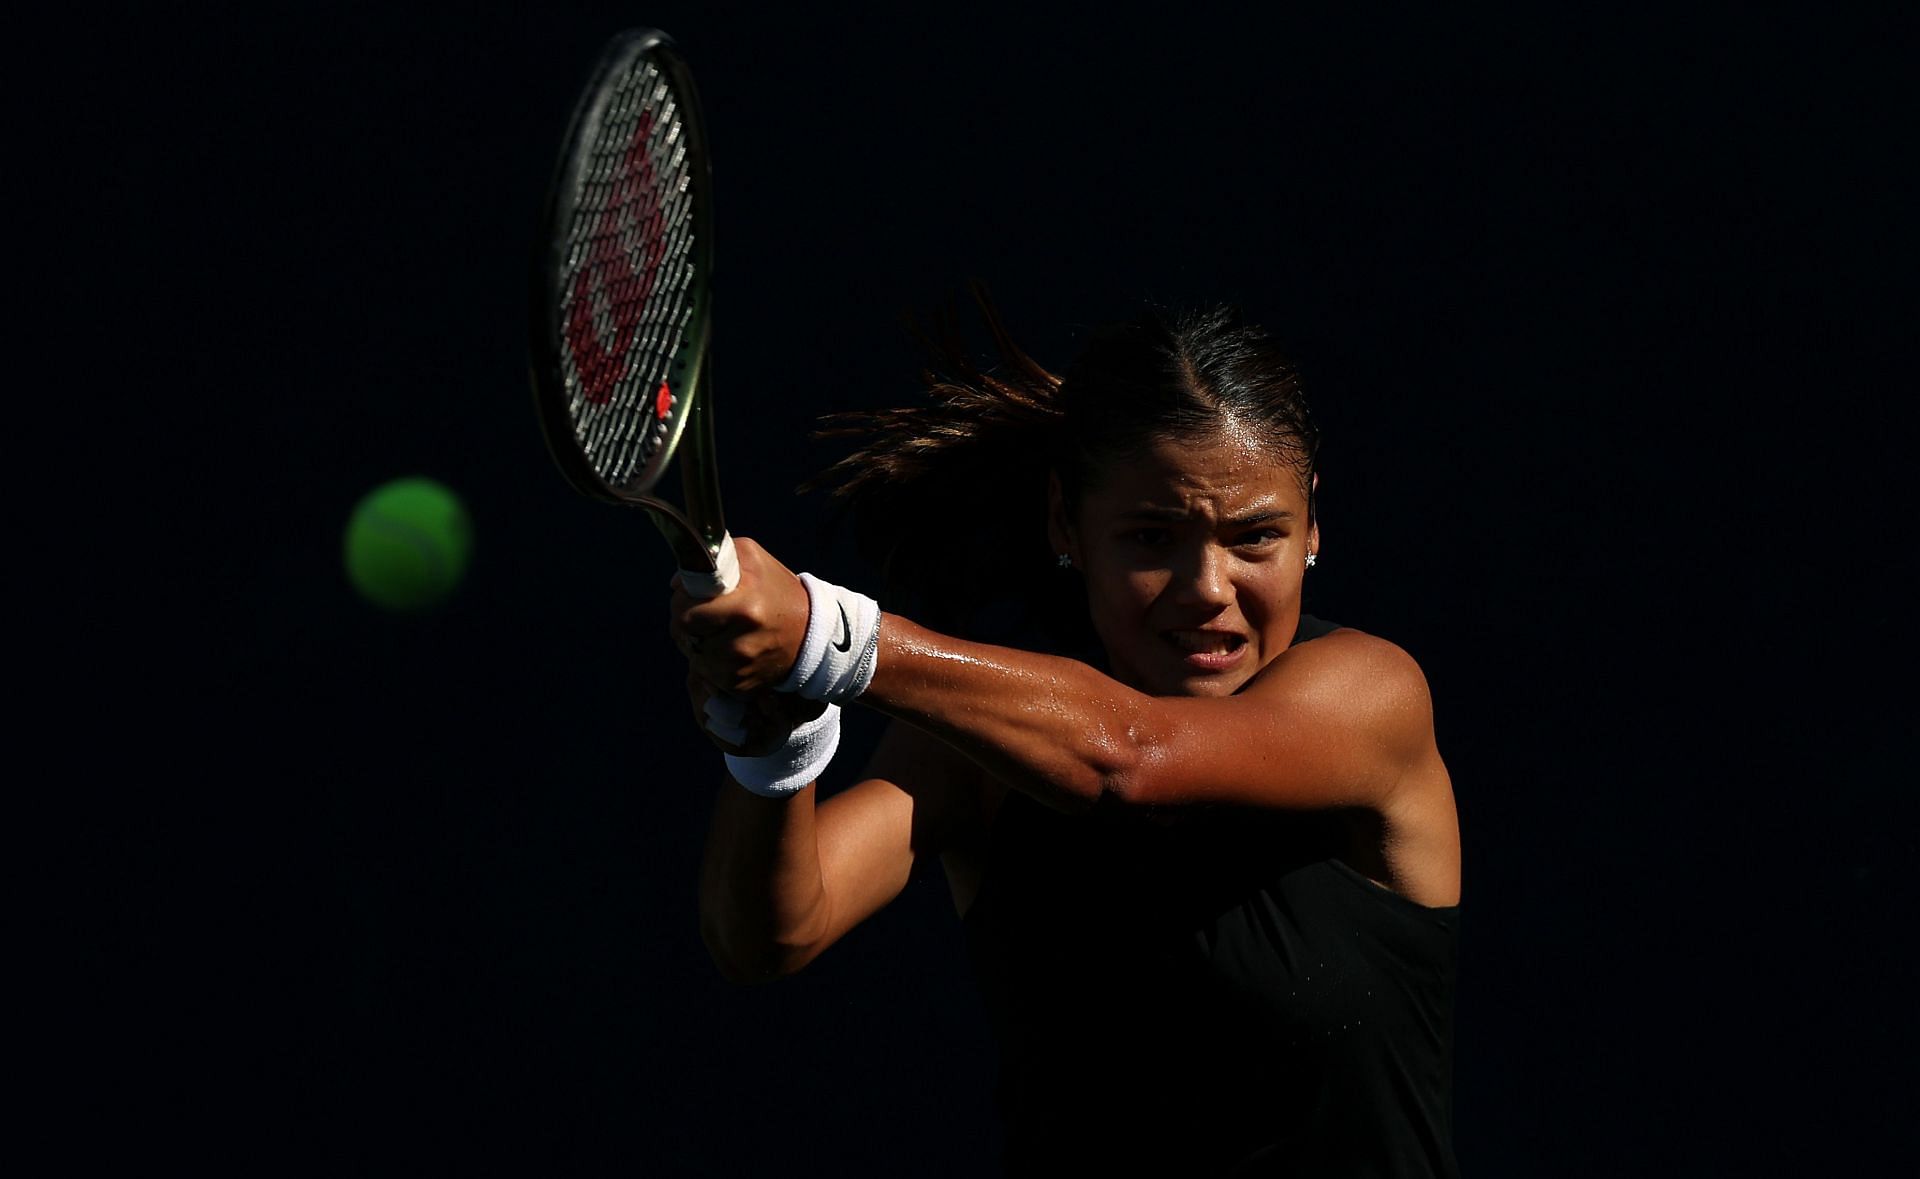 Emma Raducanu faced a first-round exit at the 2022 US Open